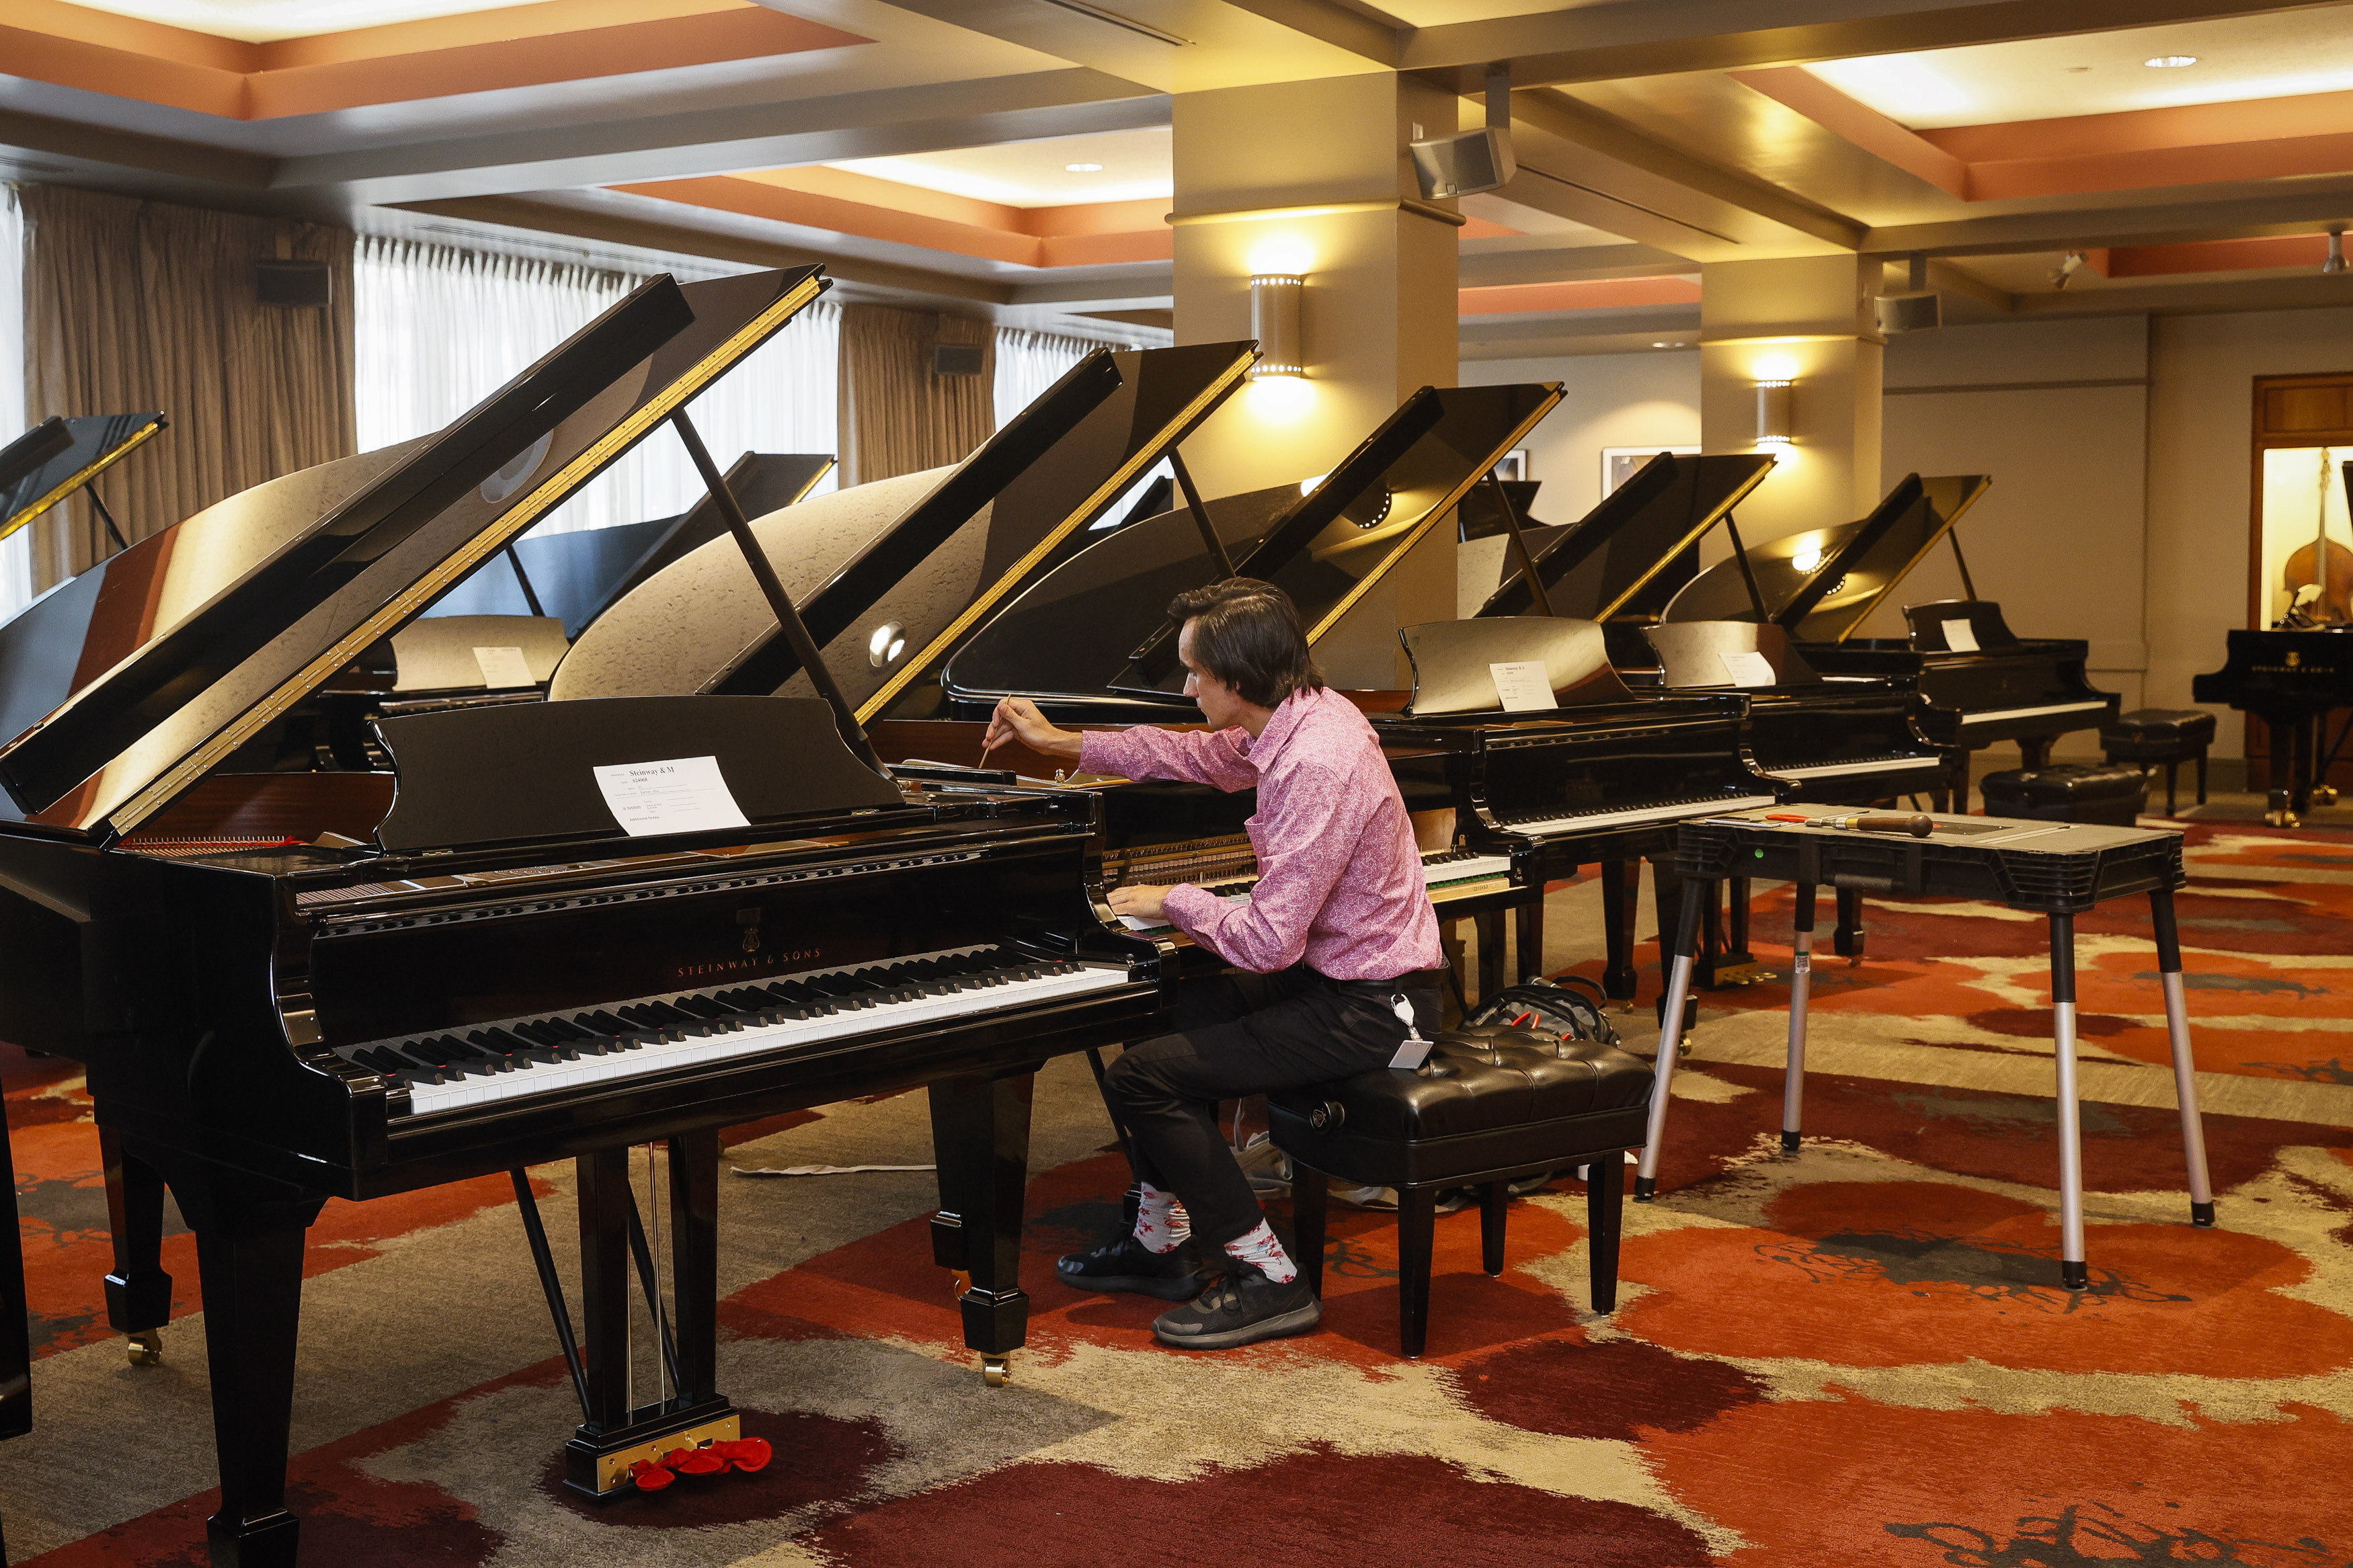 Steinway pianos are for sale at Boston's Symphony Hall this weekend